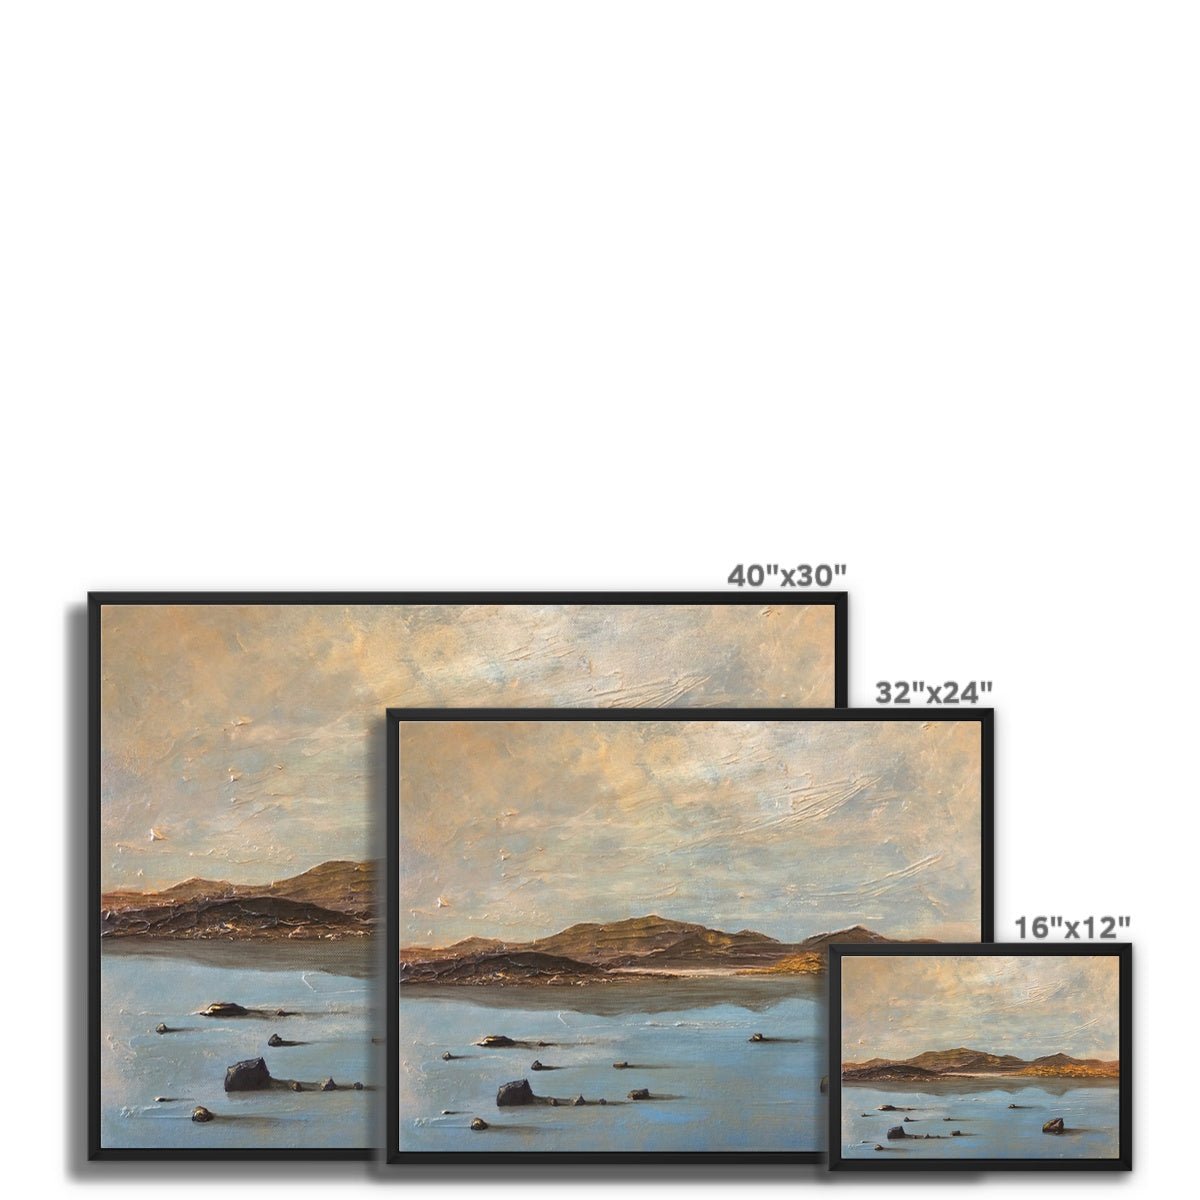 Loch Druidibeg South Uist Painting | Framed Canvas From Scotland-Floating Framed Canvas Prints-Scottish Lochs Art Gallery-Paintings, Prints, Homeware, Art Gifts From Scotland By Scottish Artist Kevin Hunter